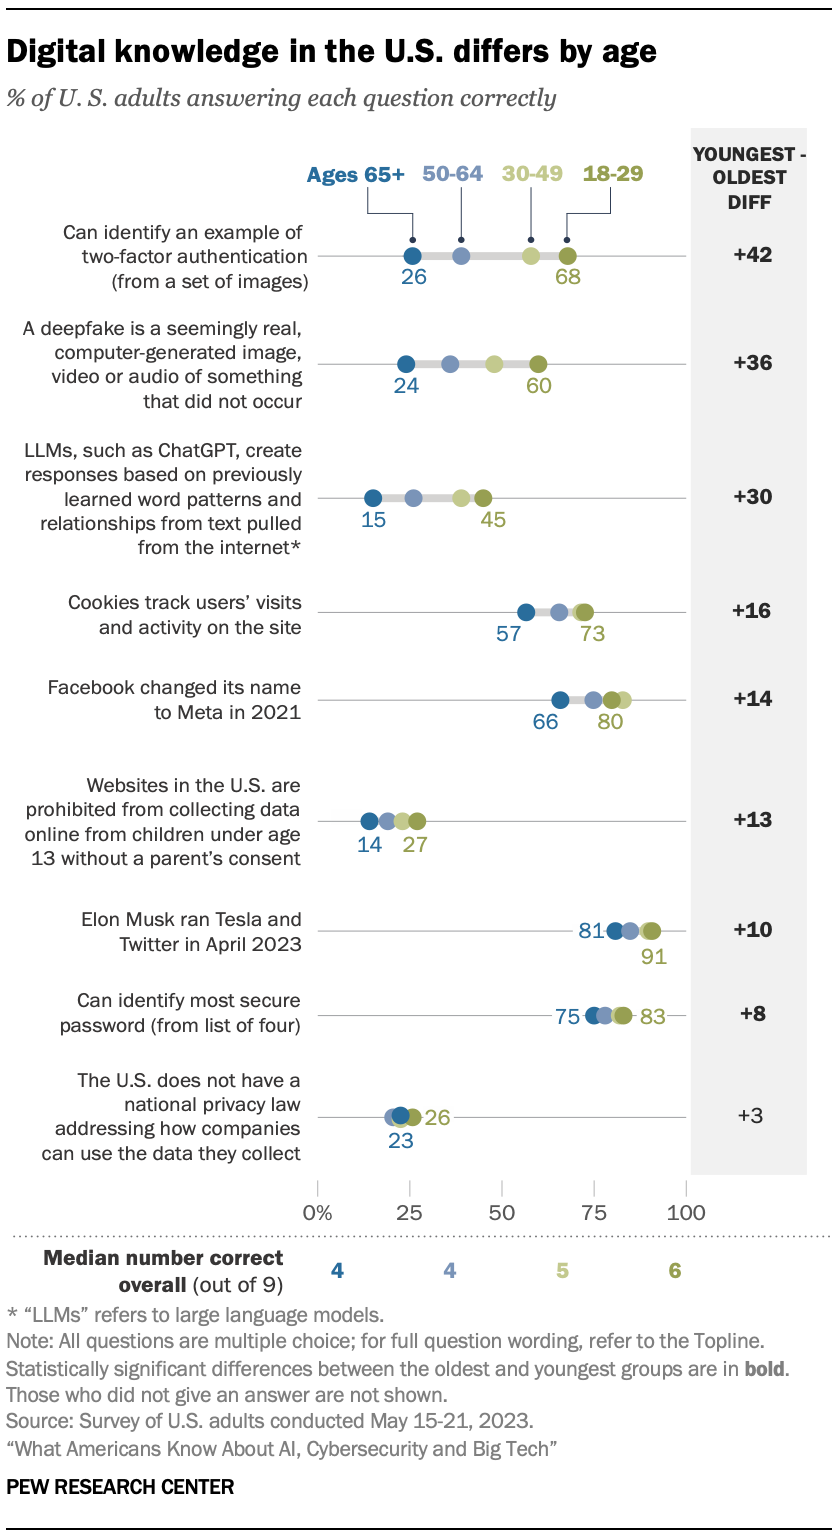 A bar chart showing that Digital knowledge in the U.S. differs by age